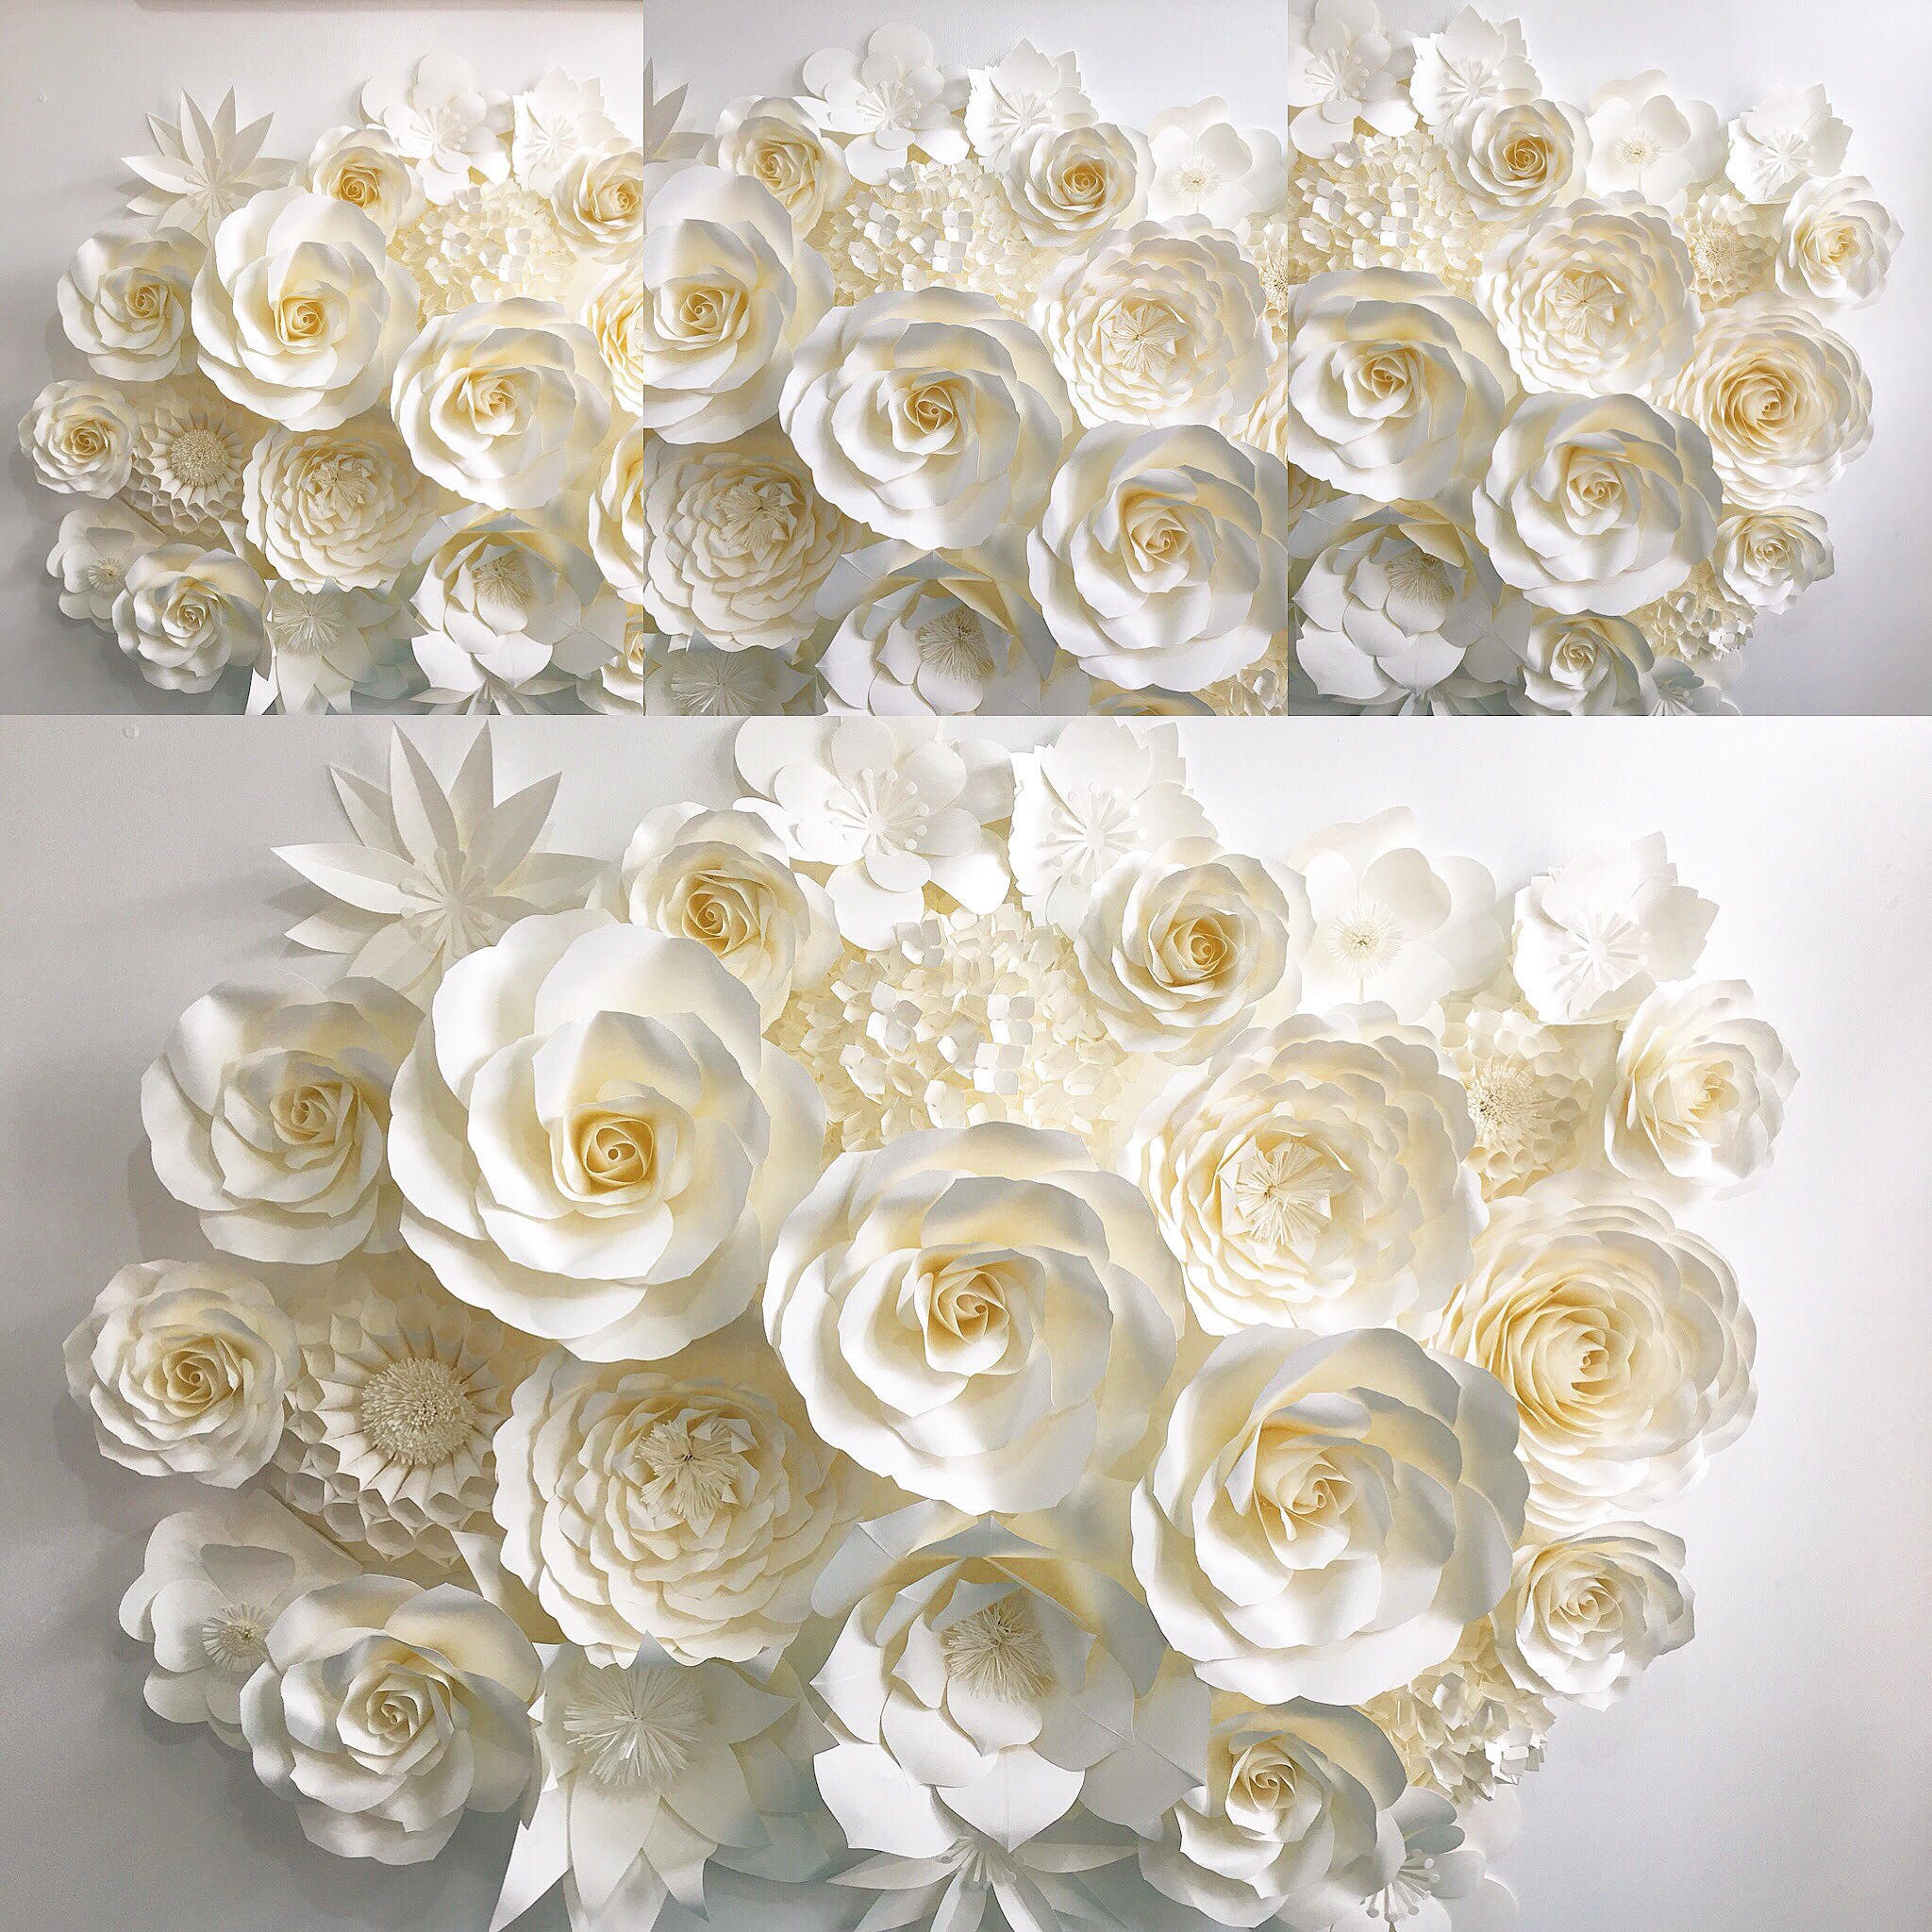 Flower Backdrop in Off-white Ivory Color Etsy Hong Kong